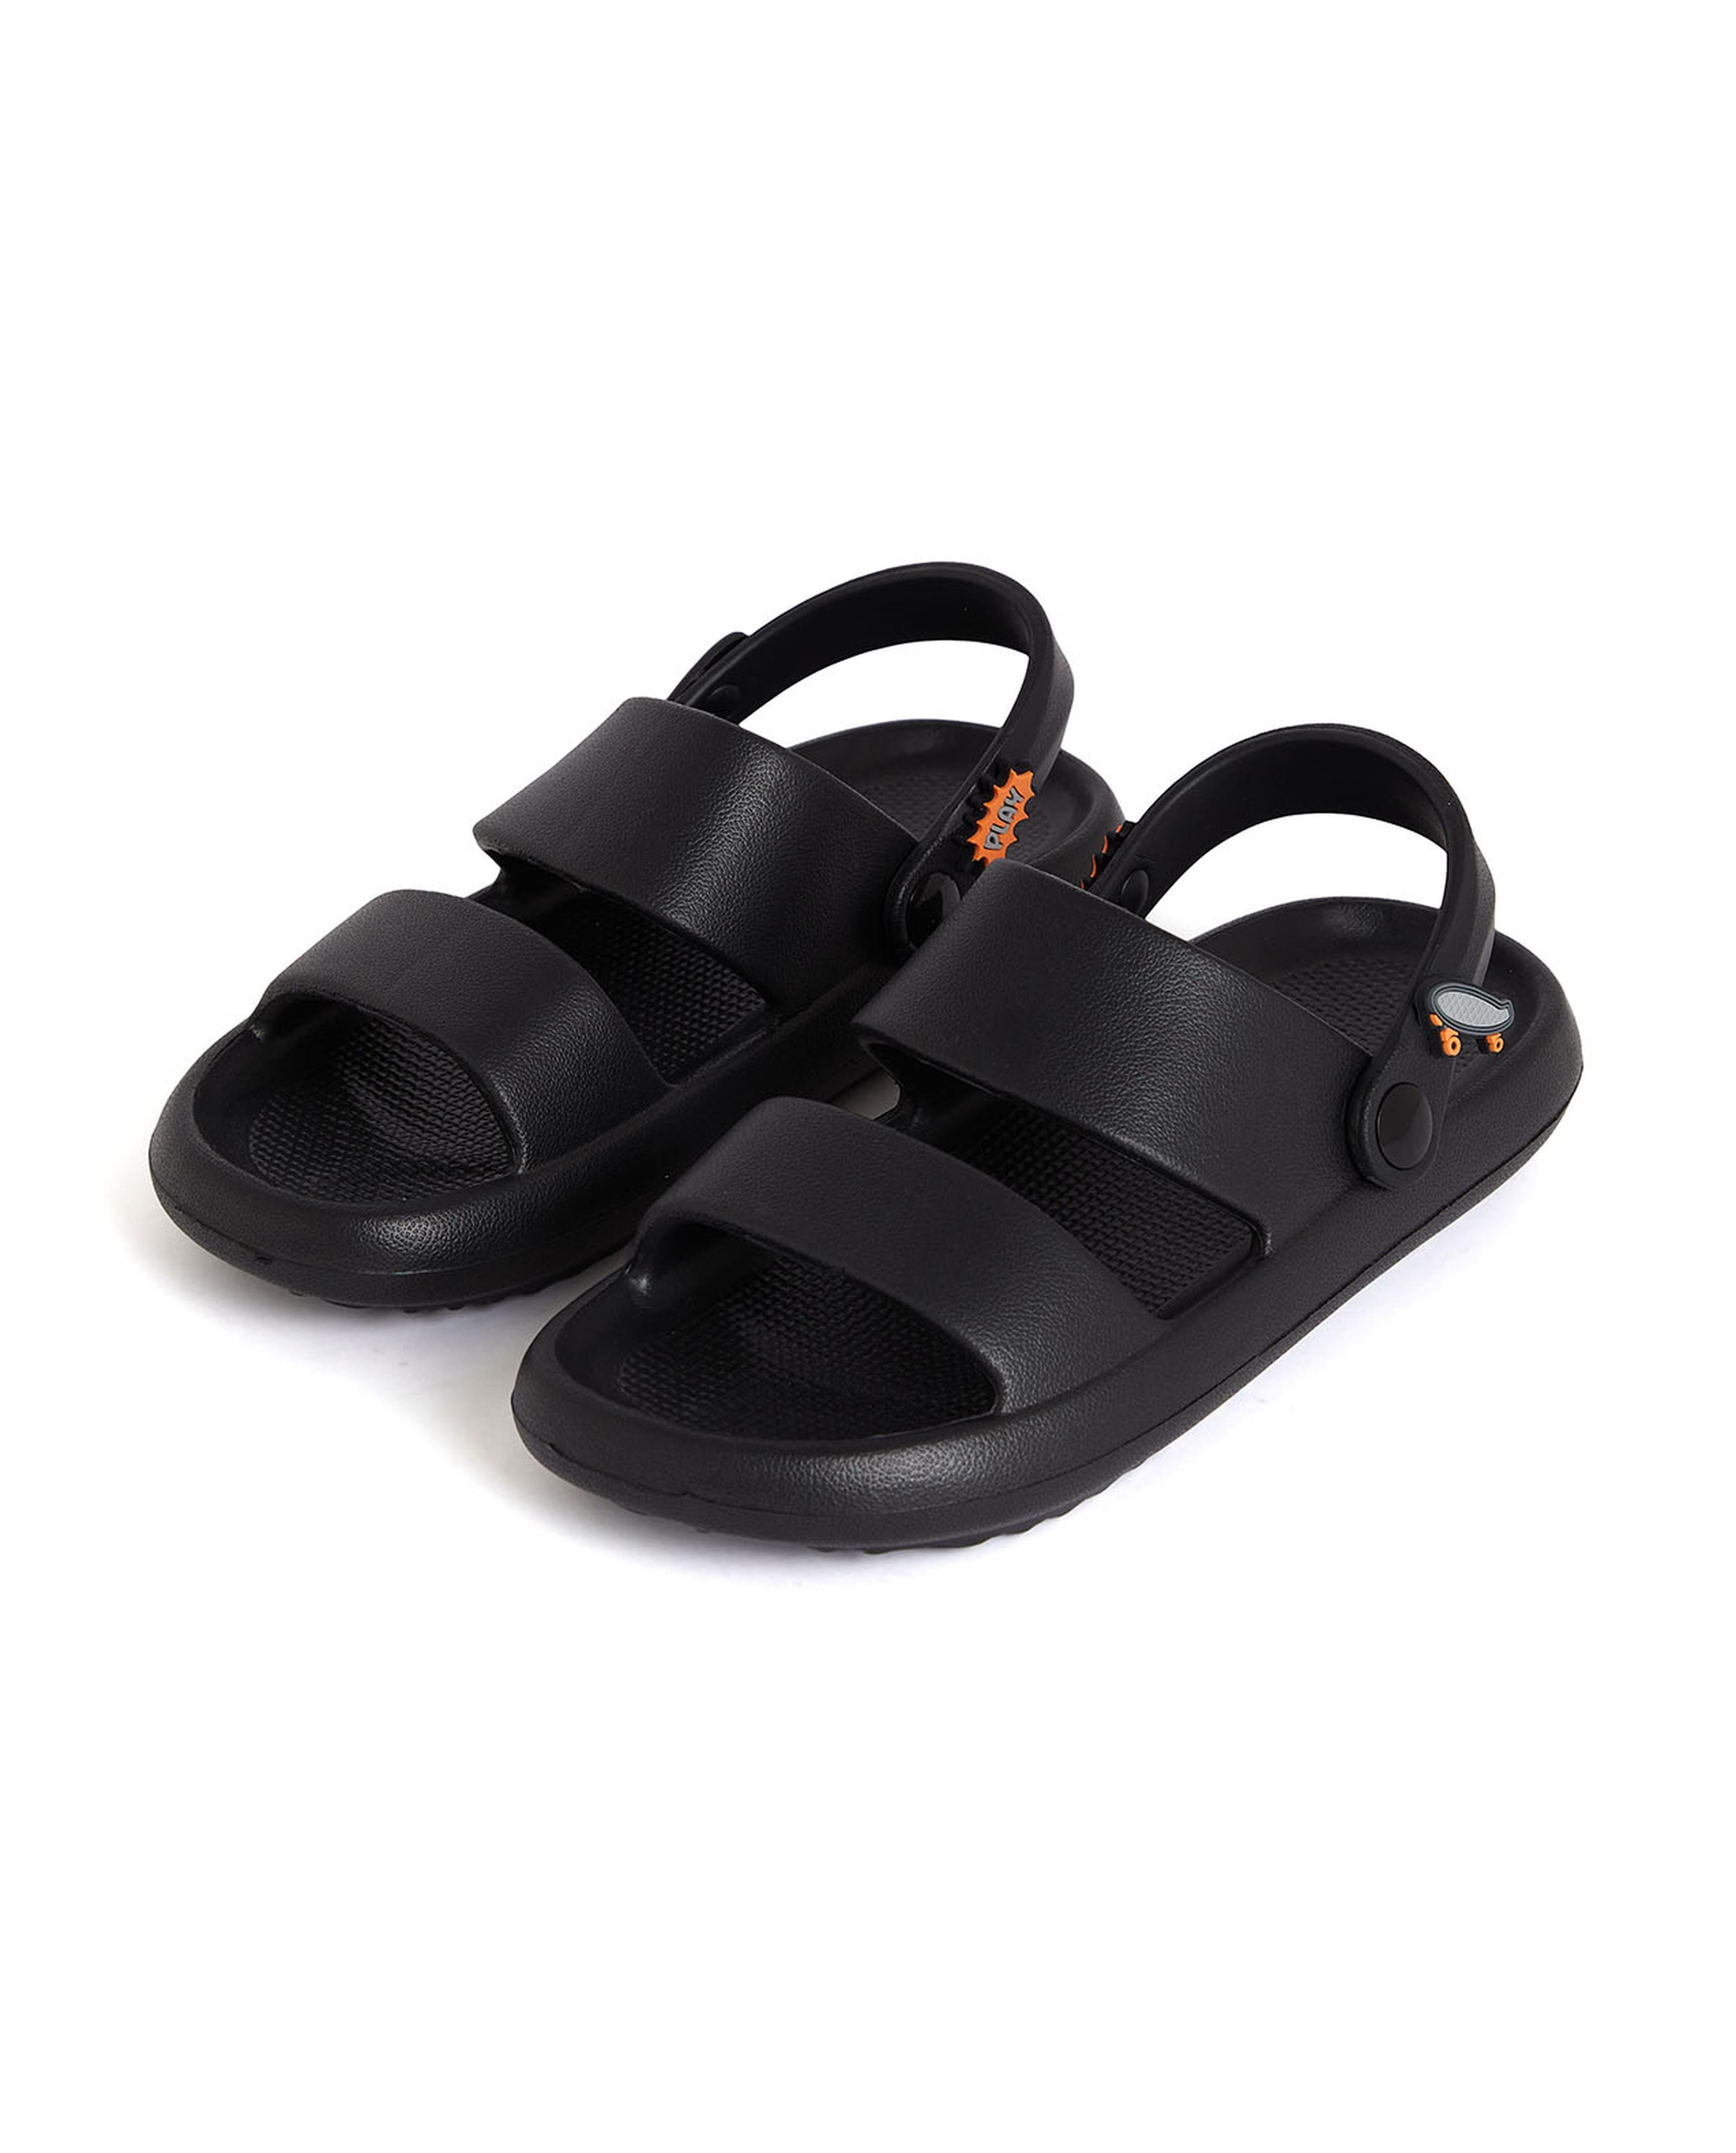 Double Strap Slingback Sandals with Jibbitz